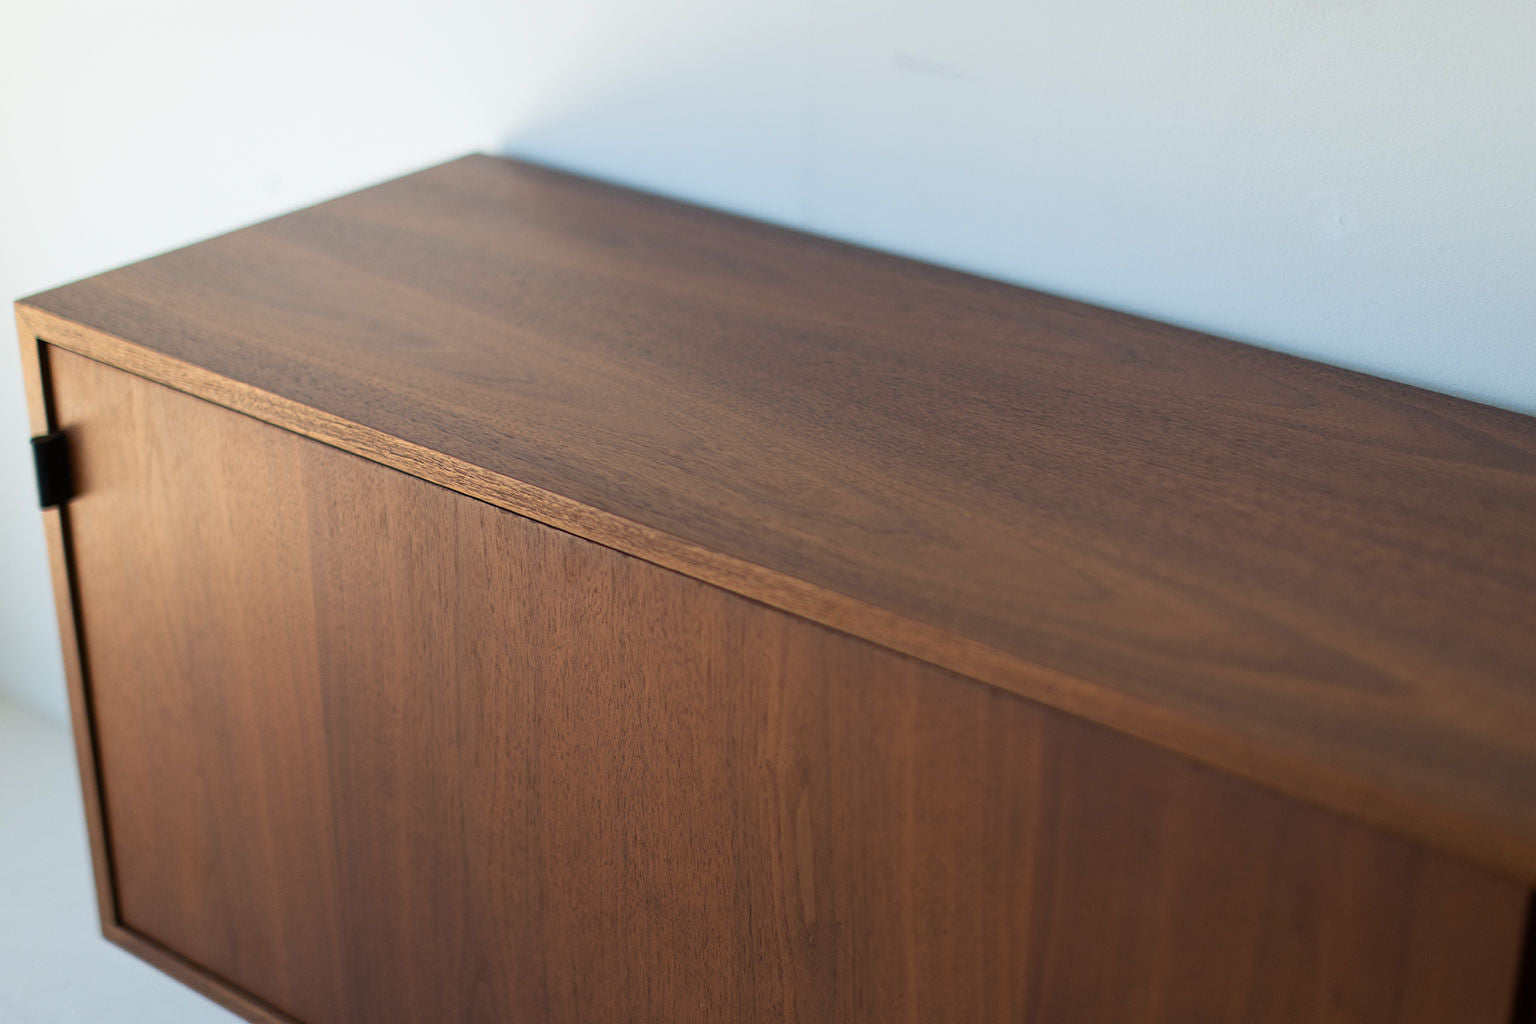 Florence Knoll Walnut Floating Credenza for Knoll Inc.